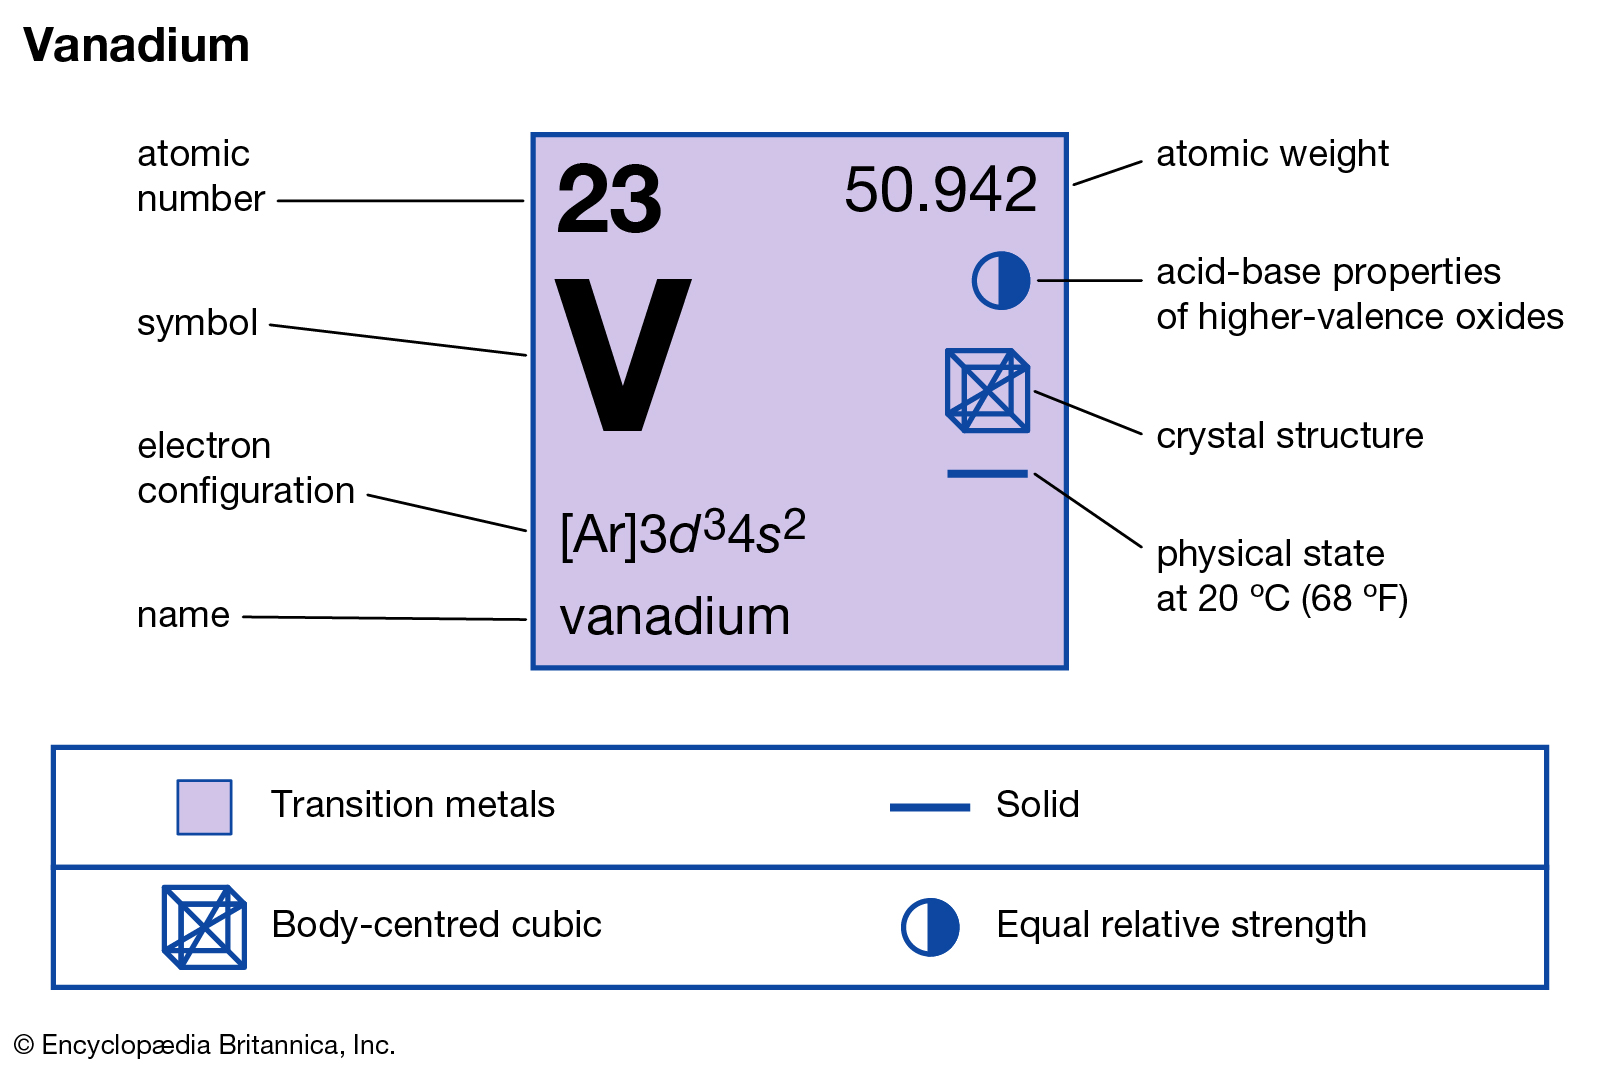 hinh-anh-interesting-facts-about-vanadium-48-0